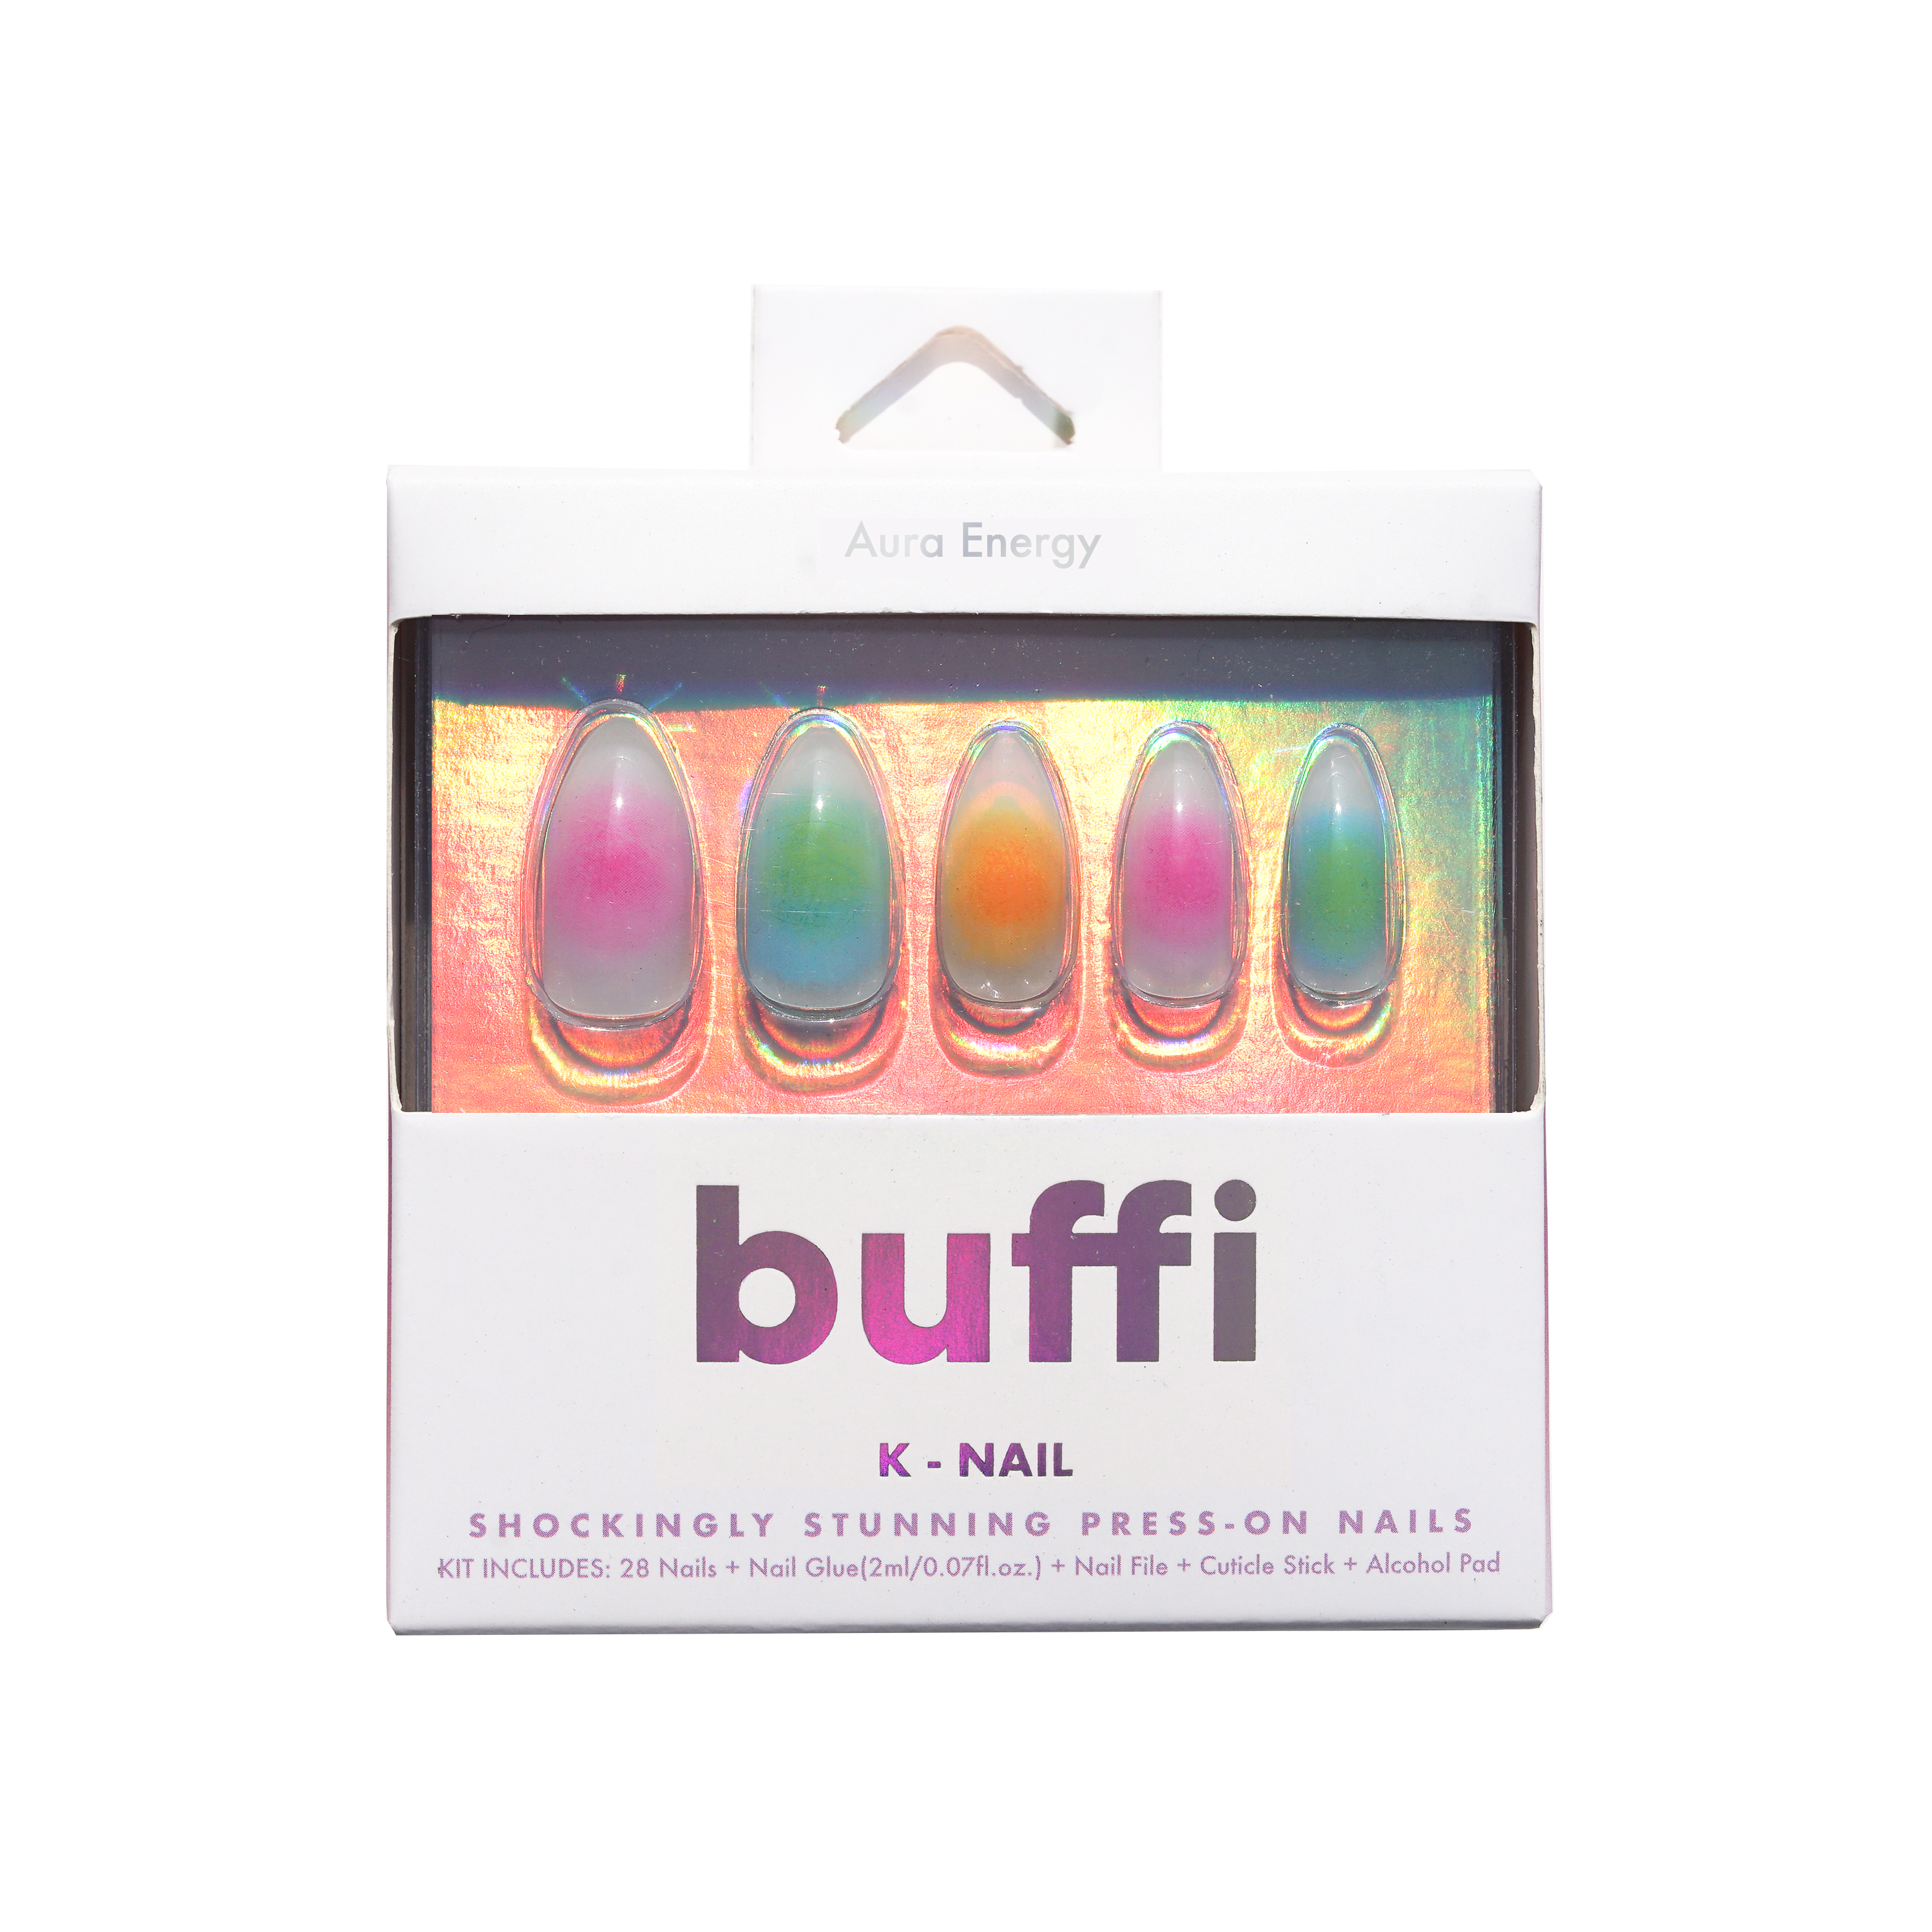 Luckiest Charms Buffi Press on Nails